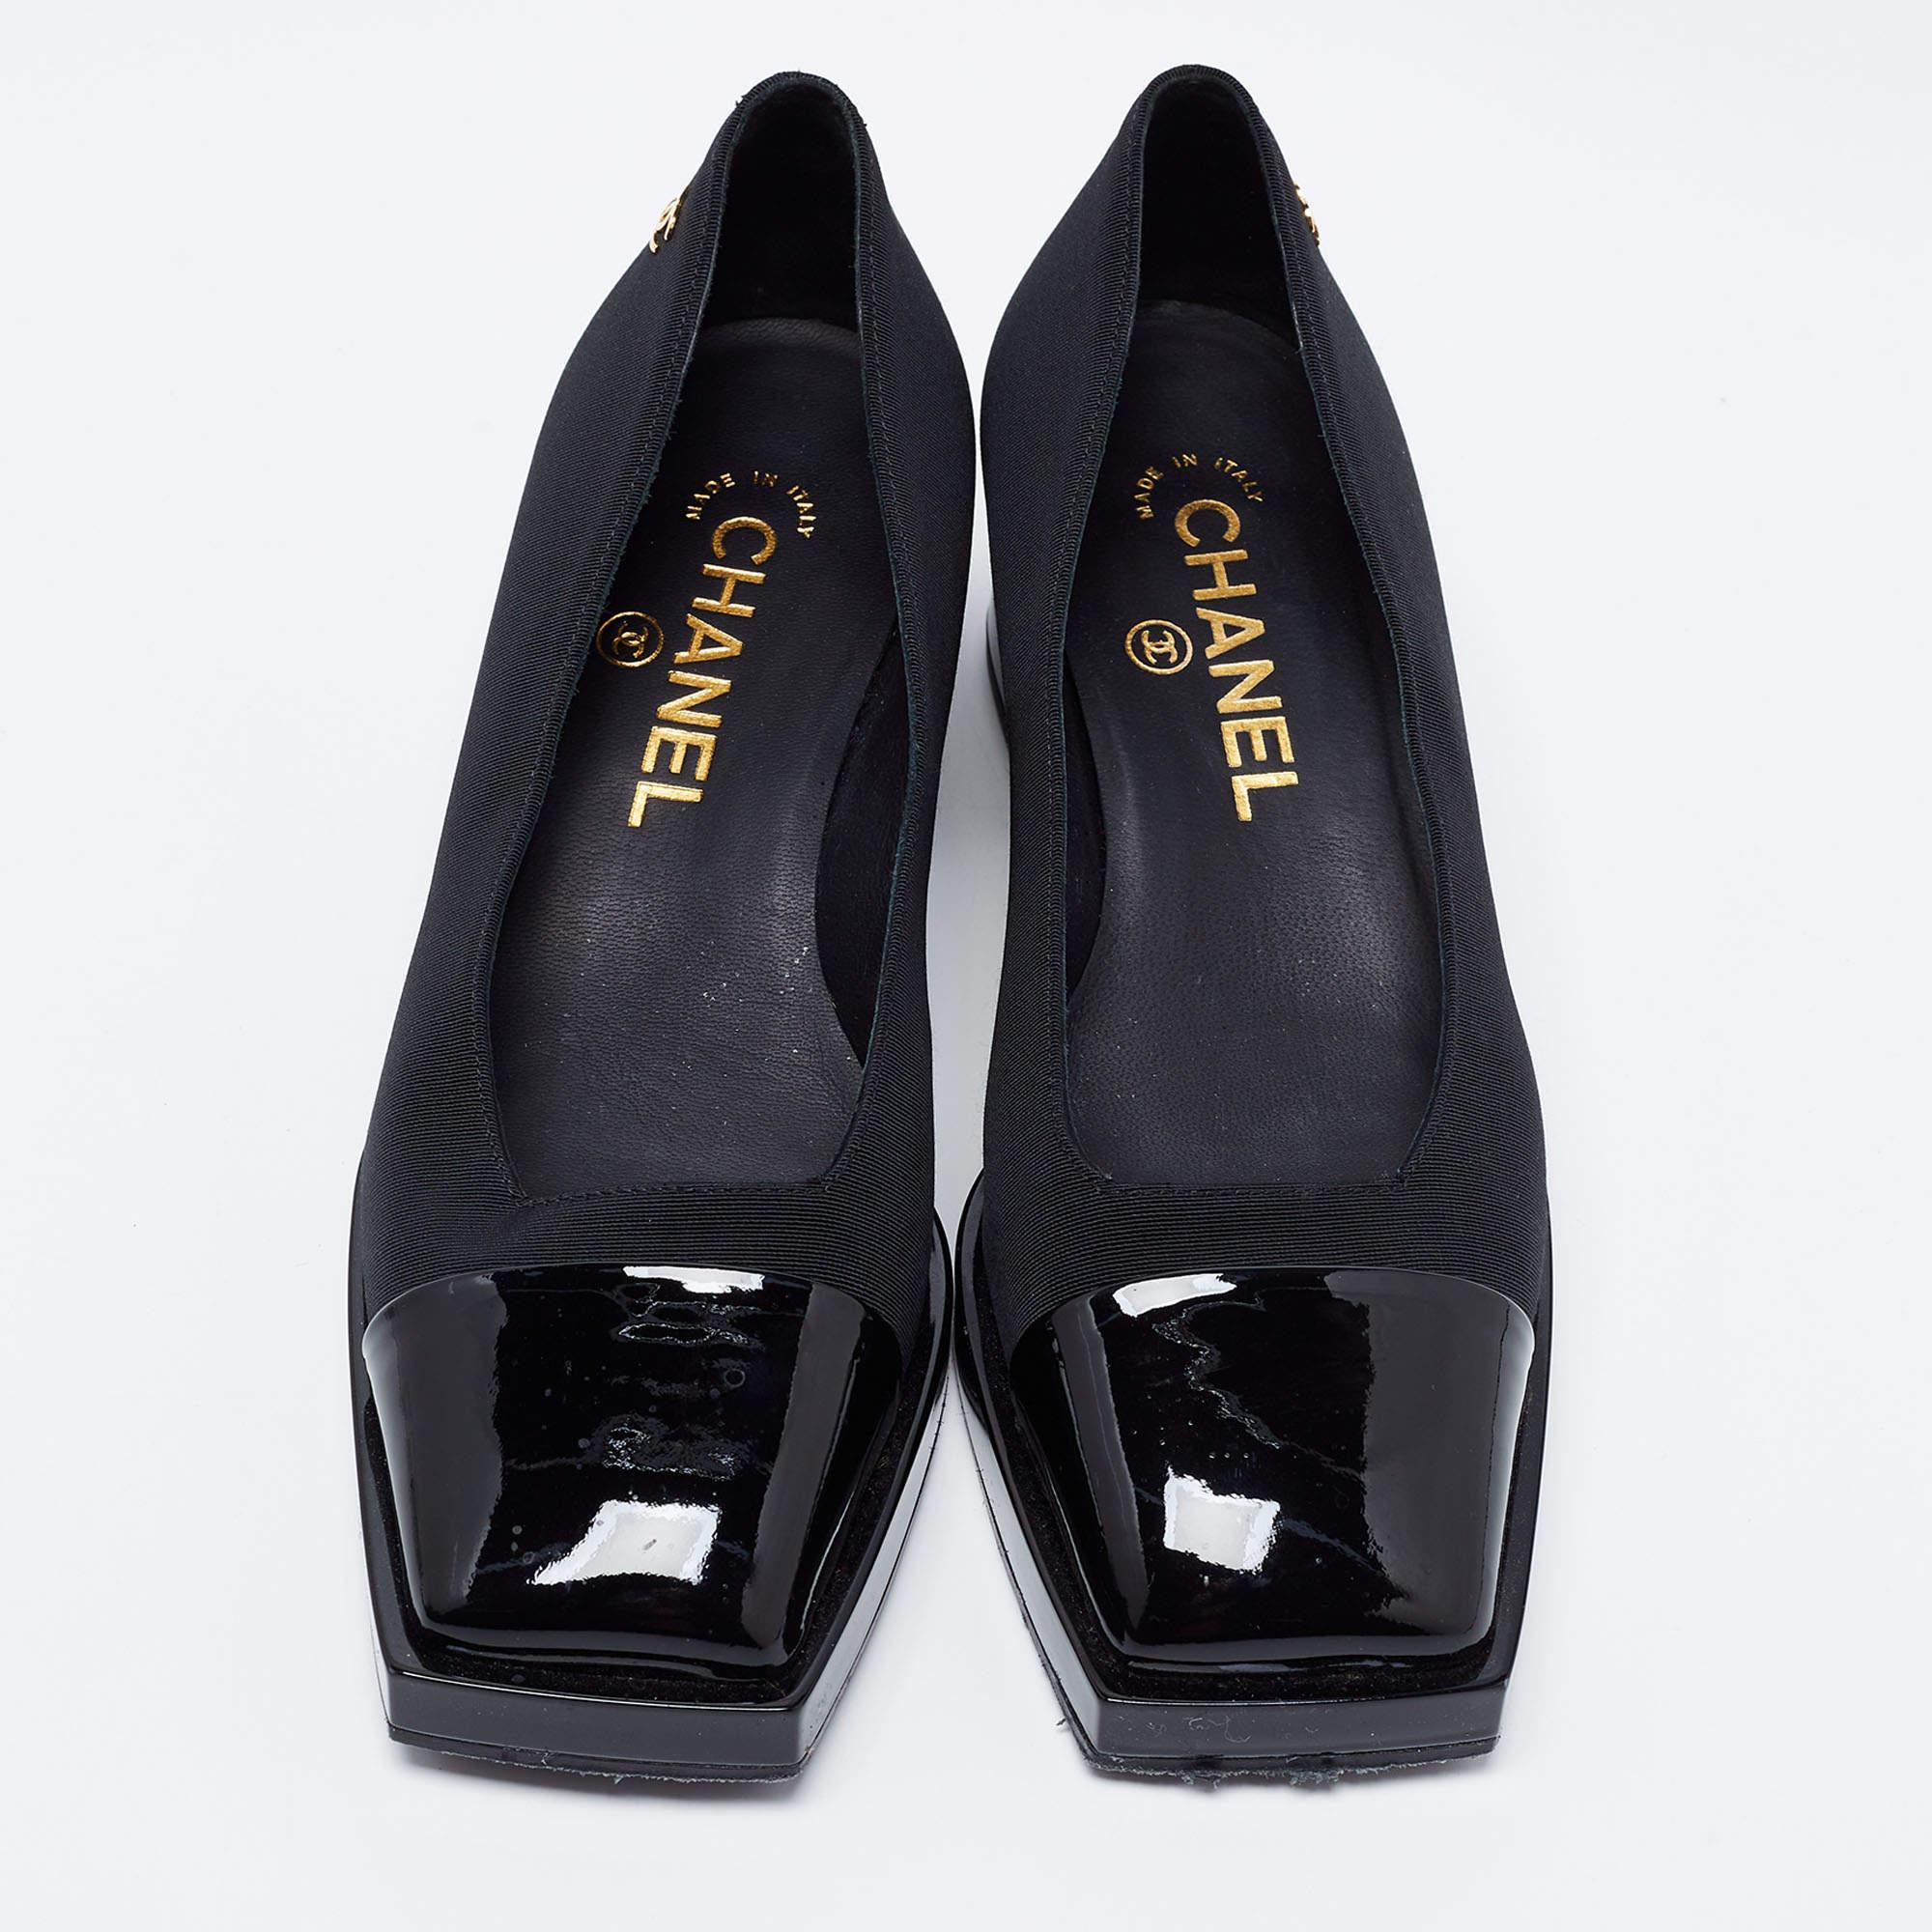 These pumps are a great choice if you’re looking to add a pair that's both classy and versatile. The pair has been made using only the best kind of materials to ensure lasting wear.

Includes: Original Dustbag
